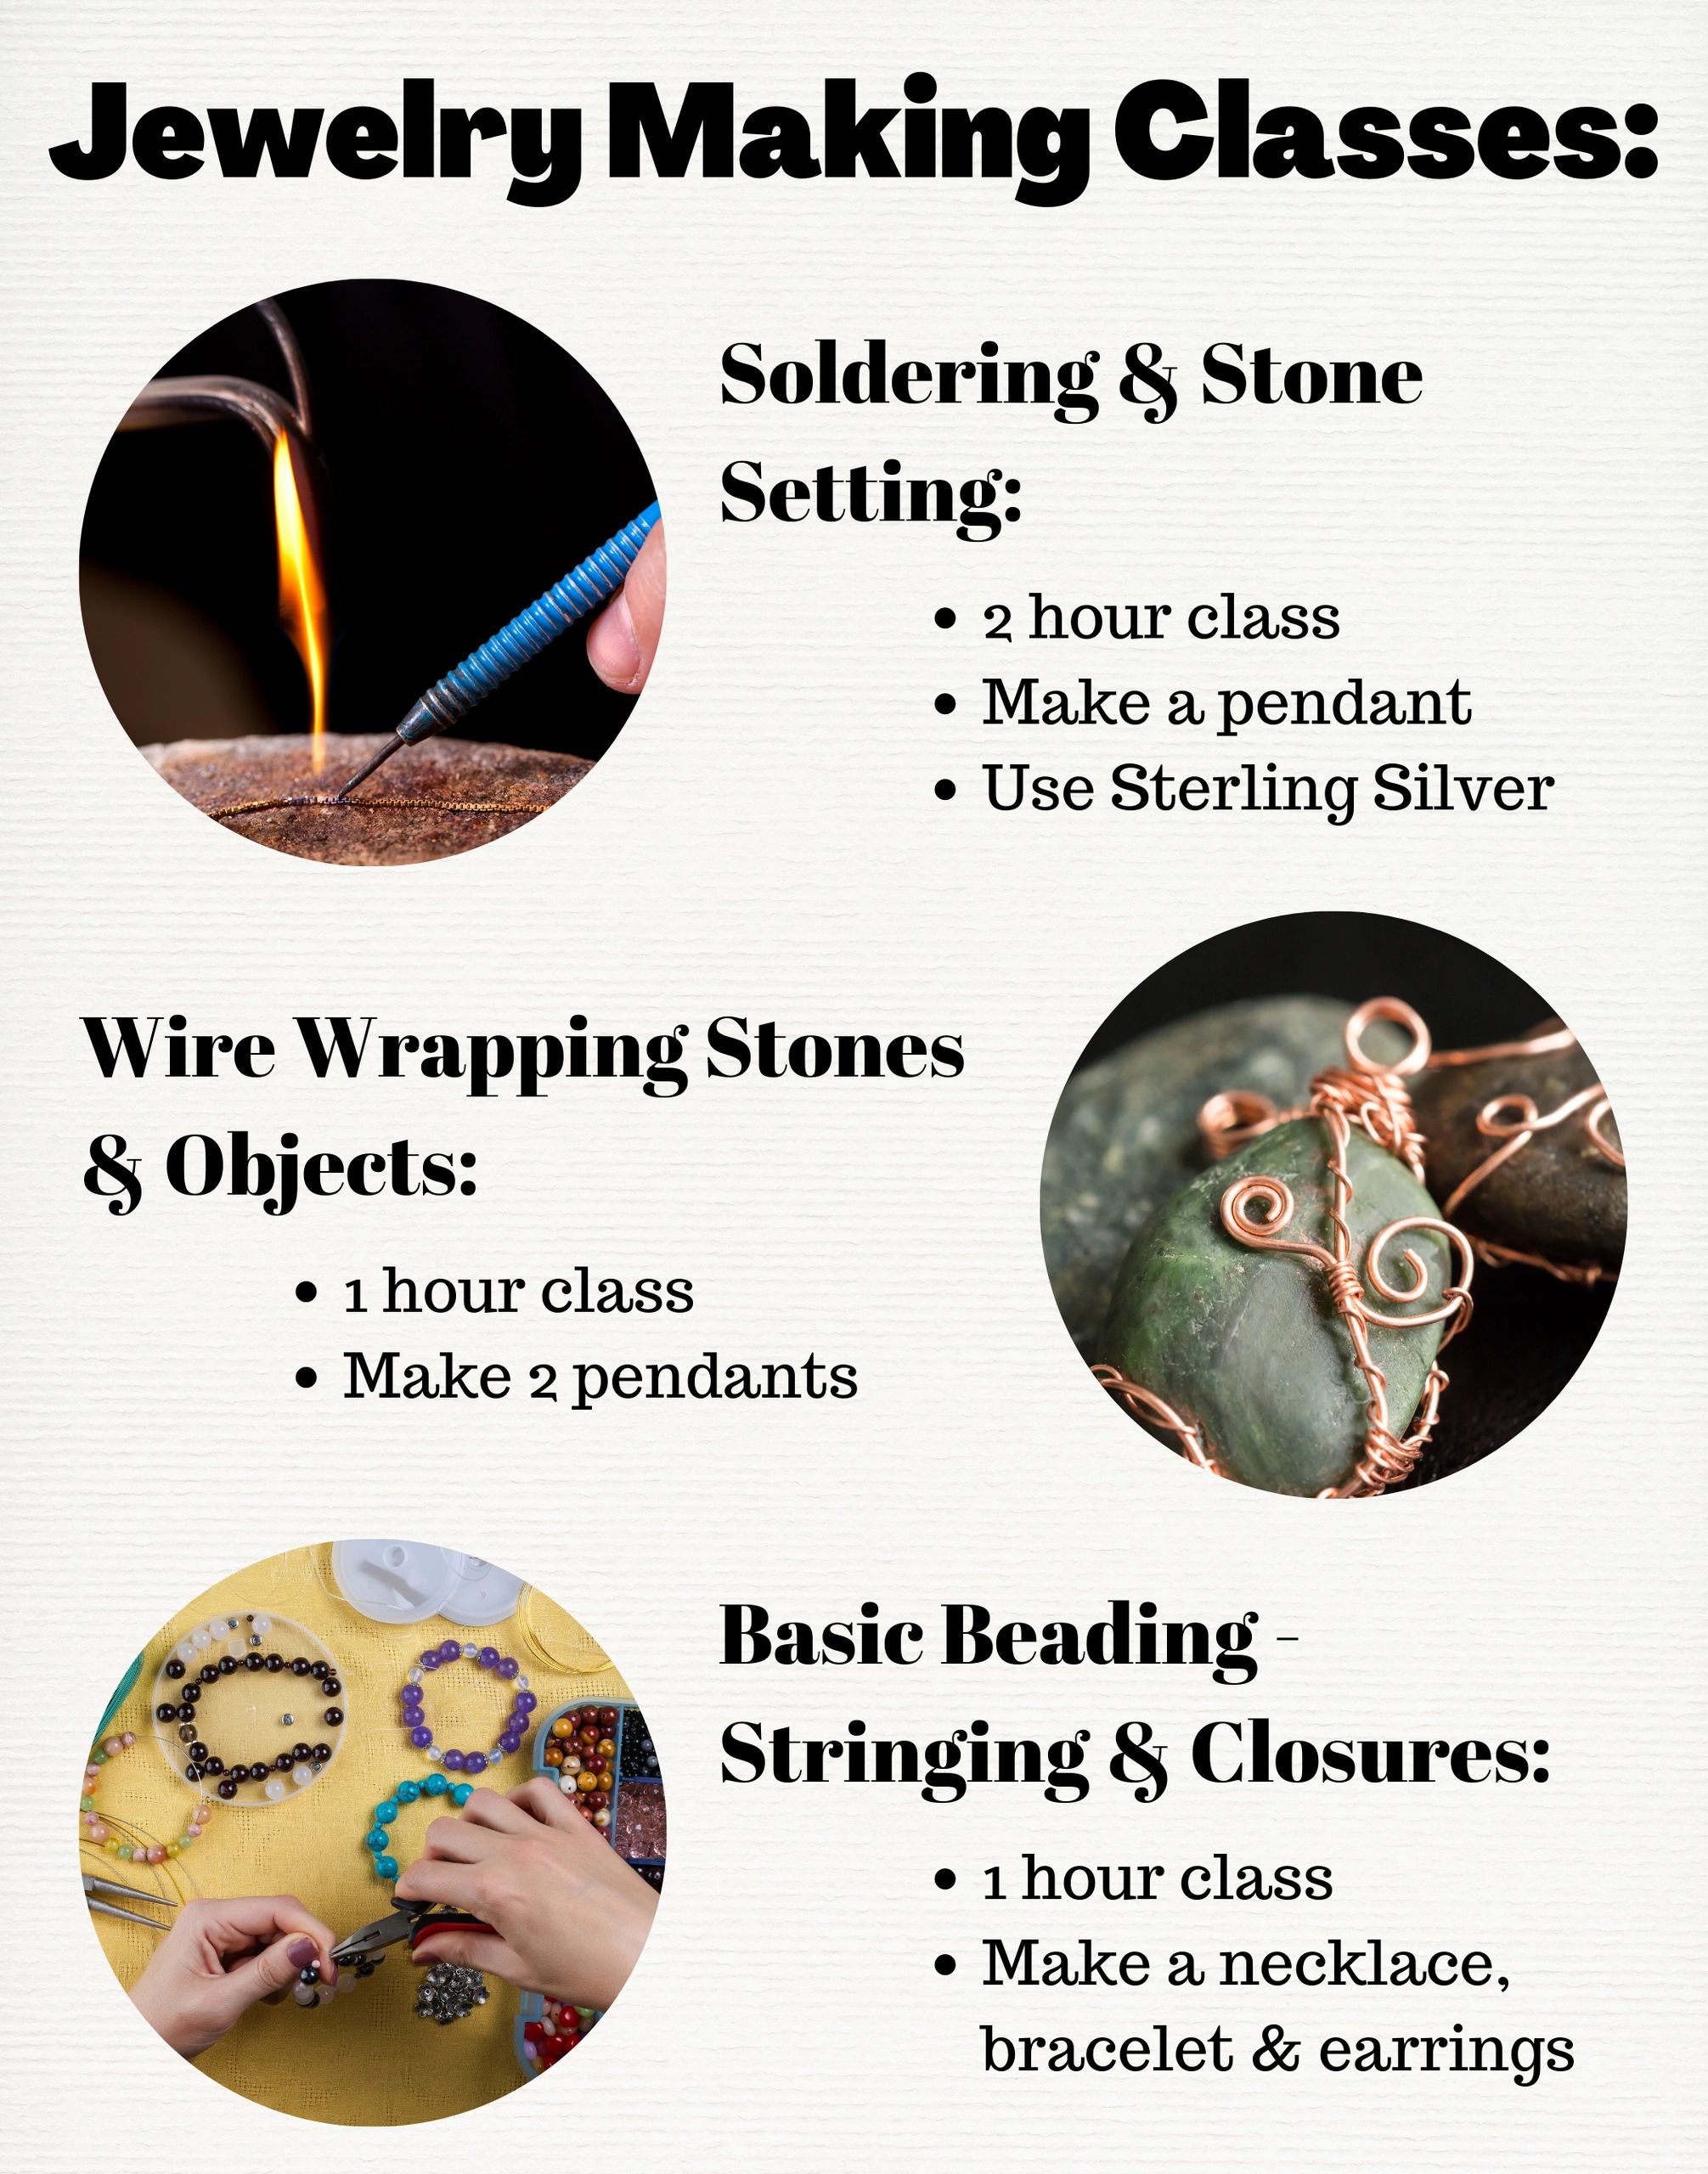 Jewelry making class image for soldering class, wire wrapping class, and beading class with pictures